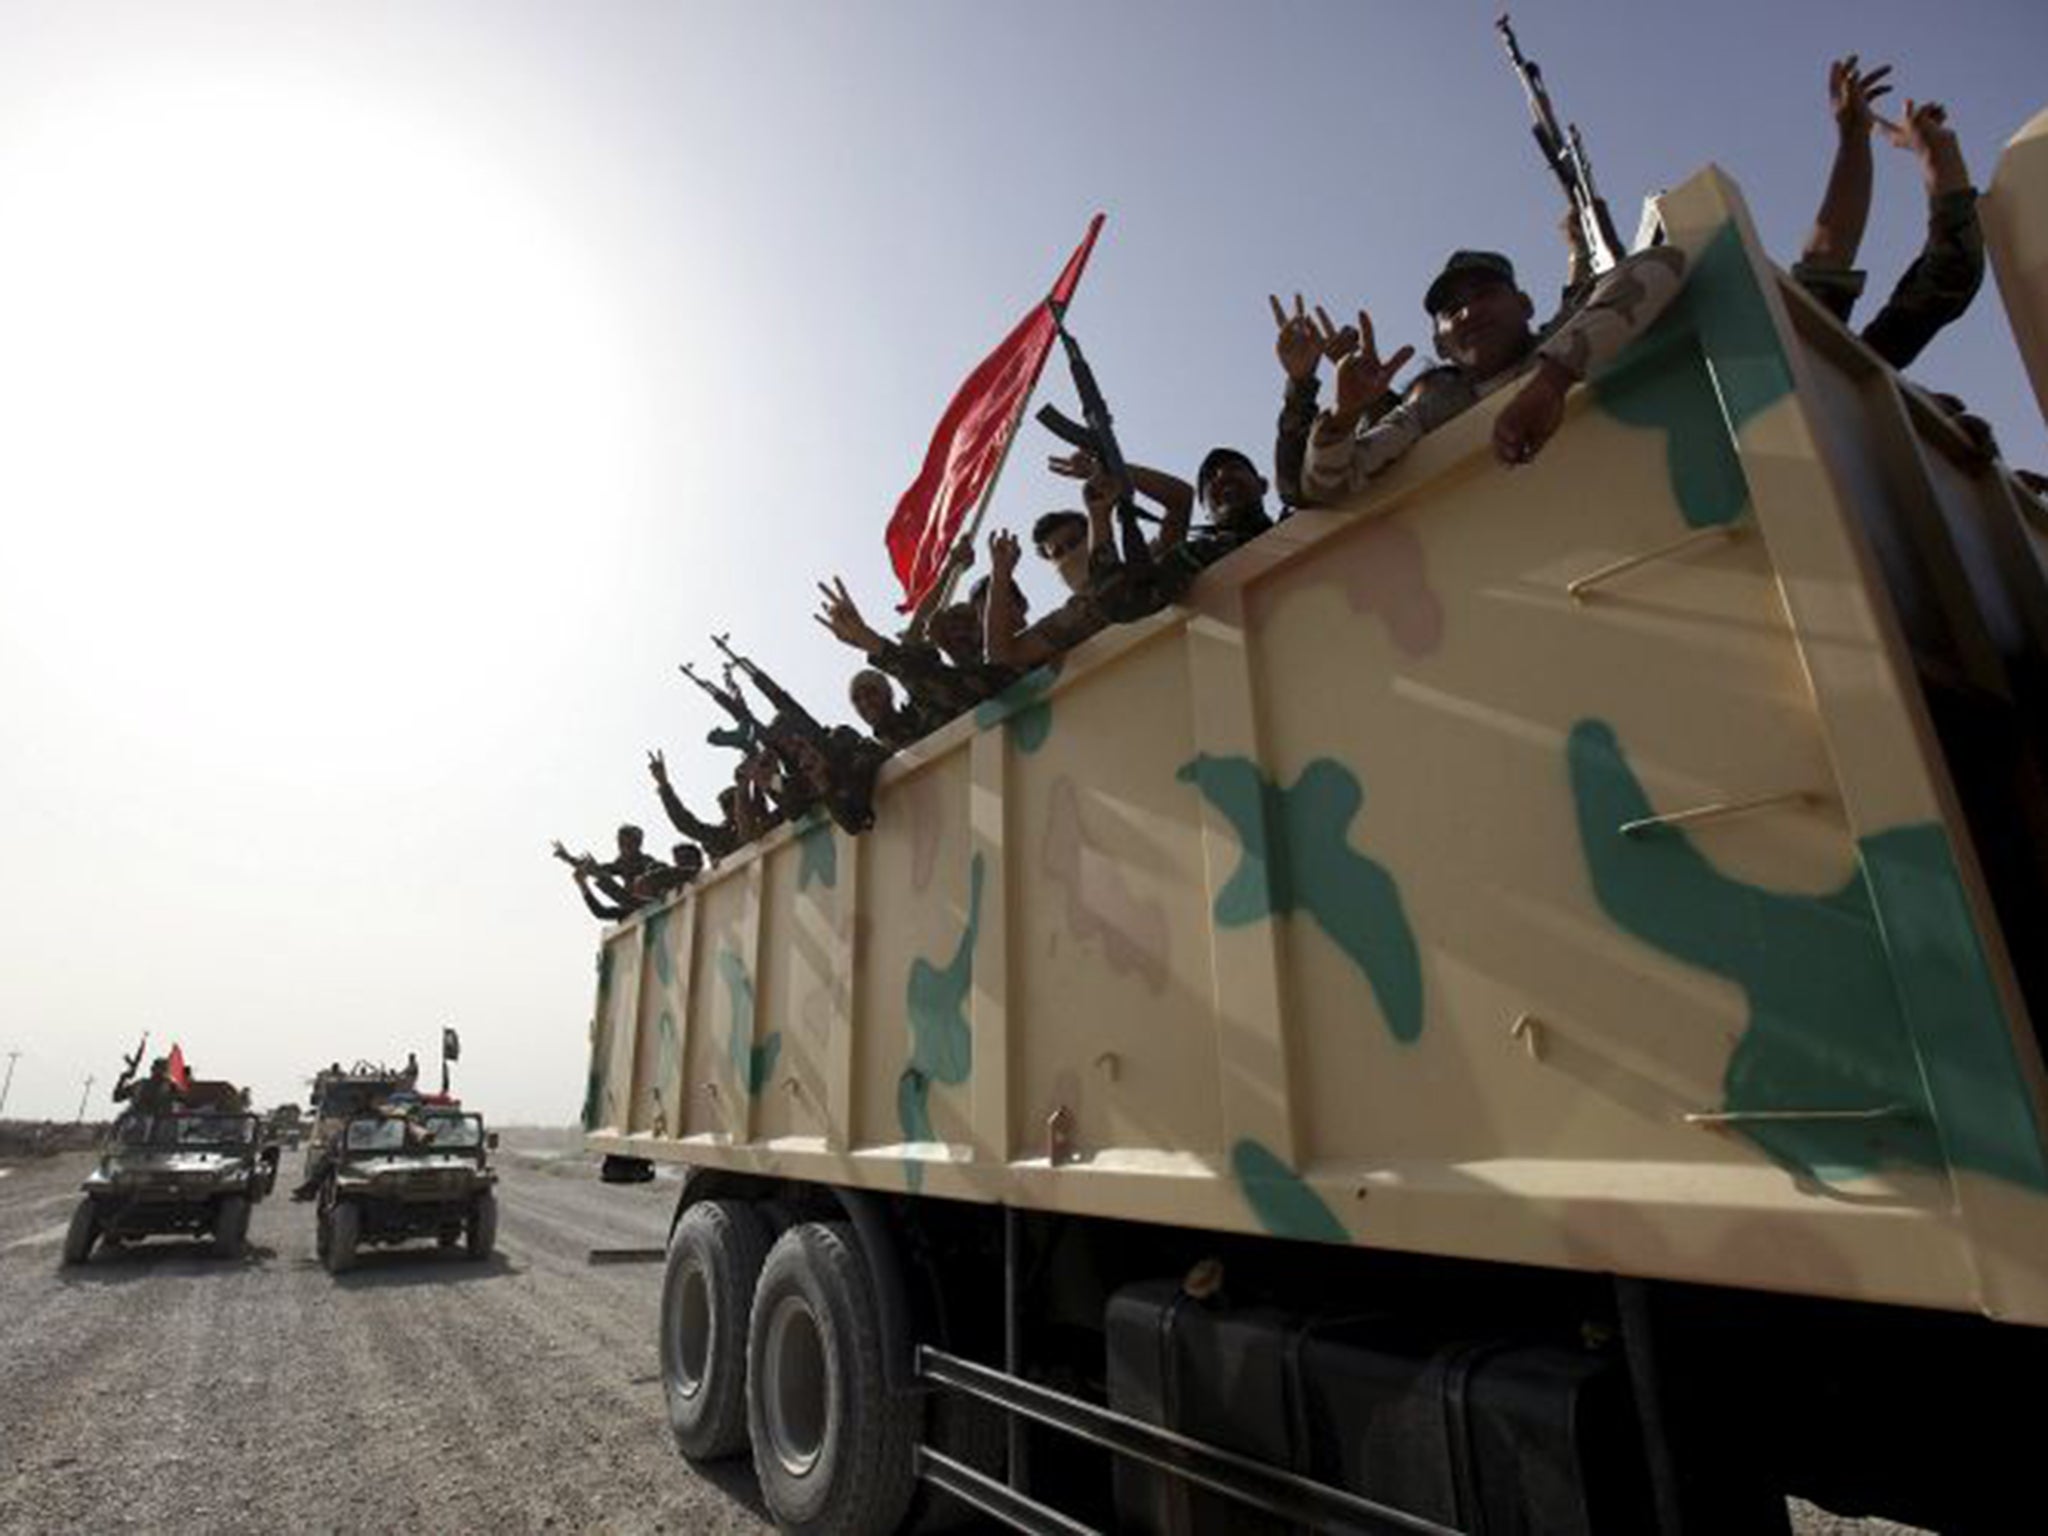 Shia forces on their way to fight IS after it advanced on Ramadi